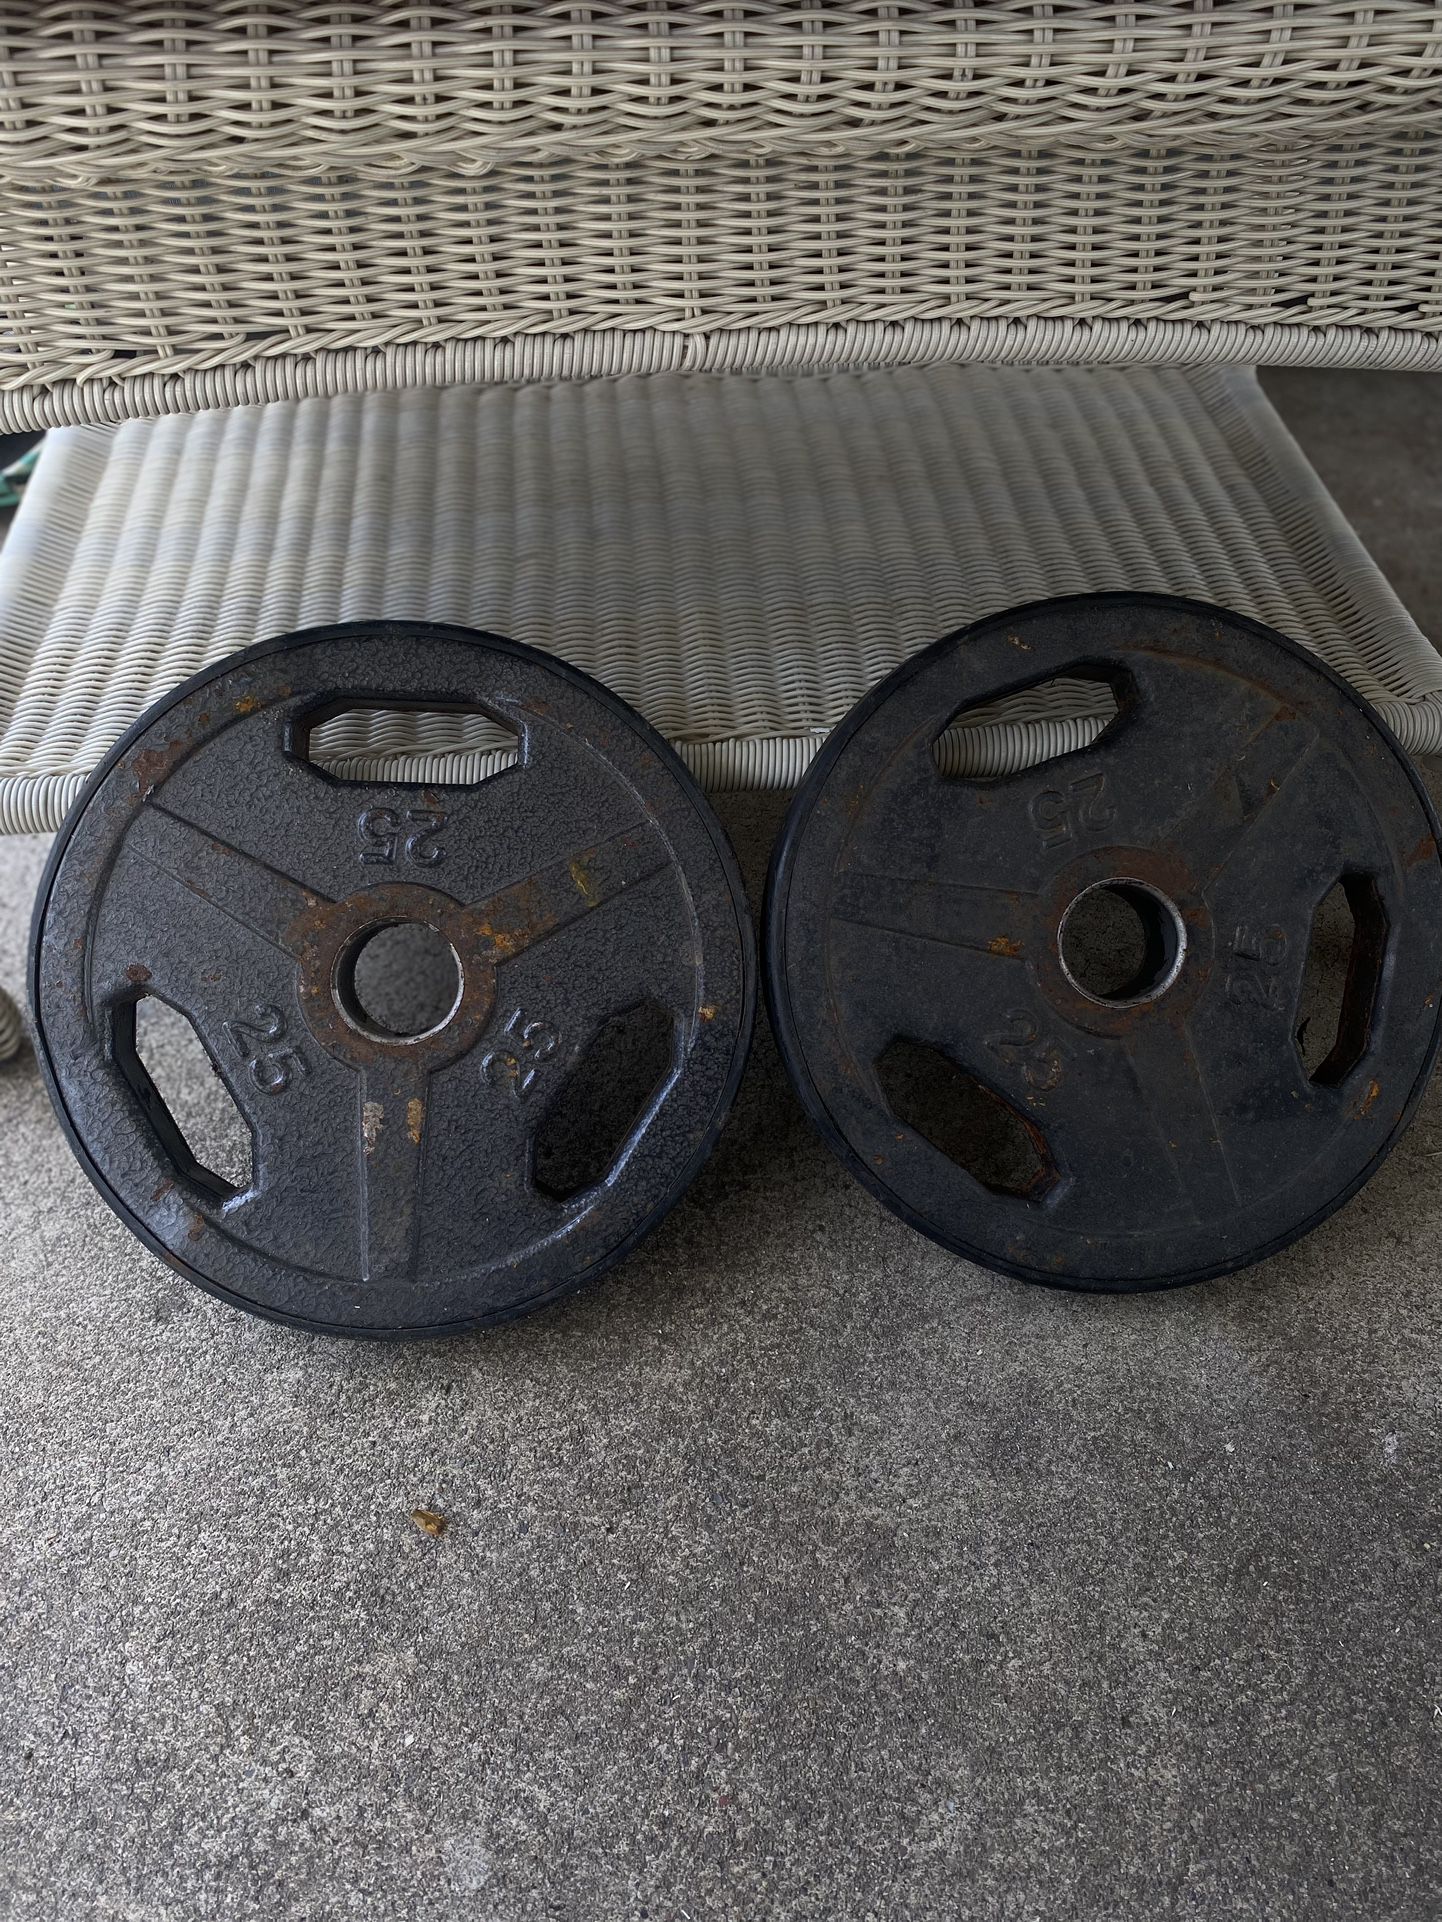 25lb Plates for Barbell - Pair Of 2